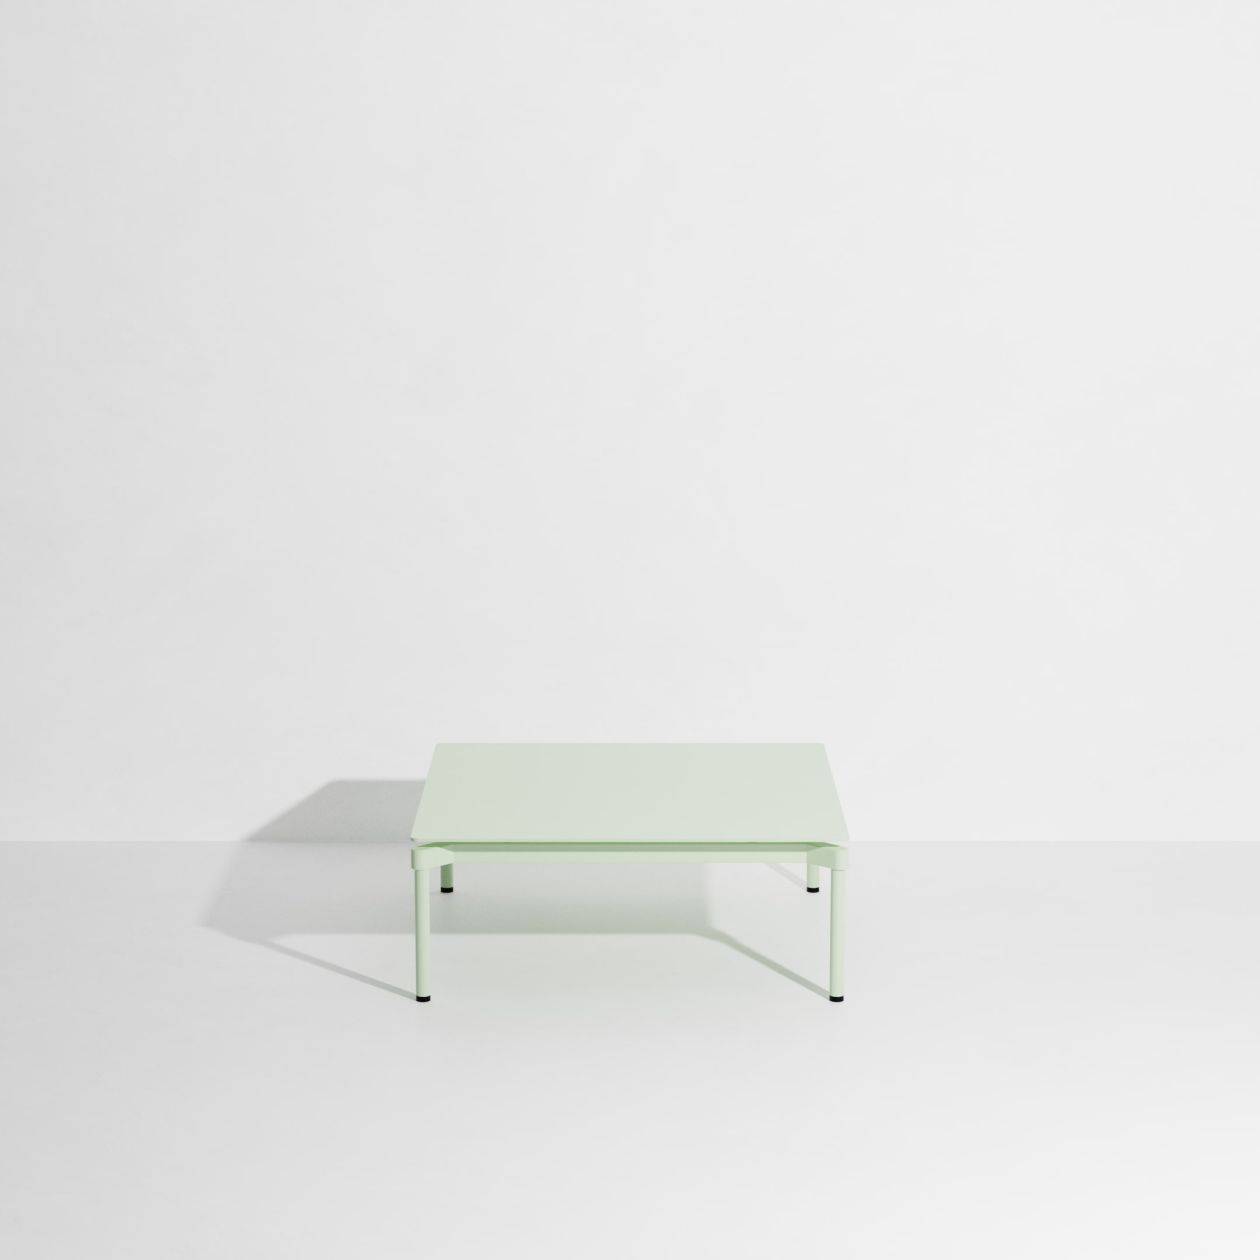 Fromme Coffee Table - Pastel green